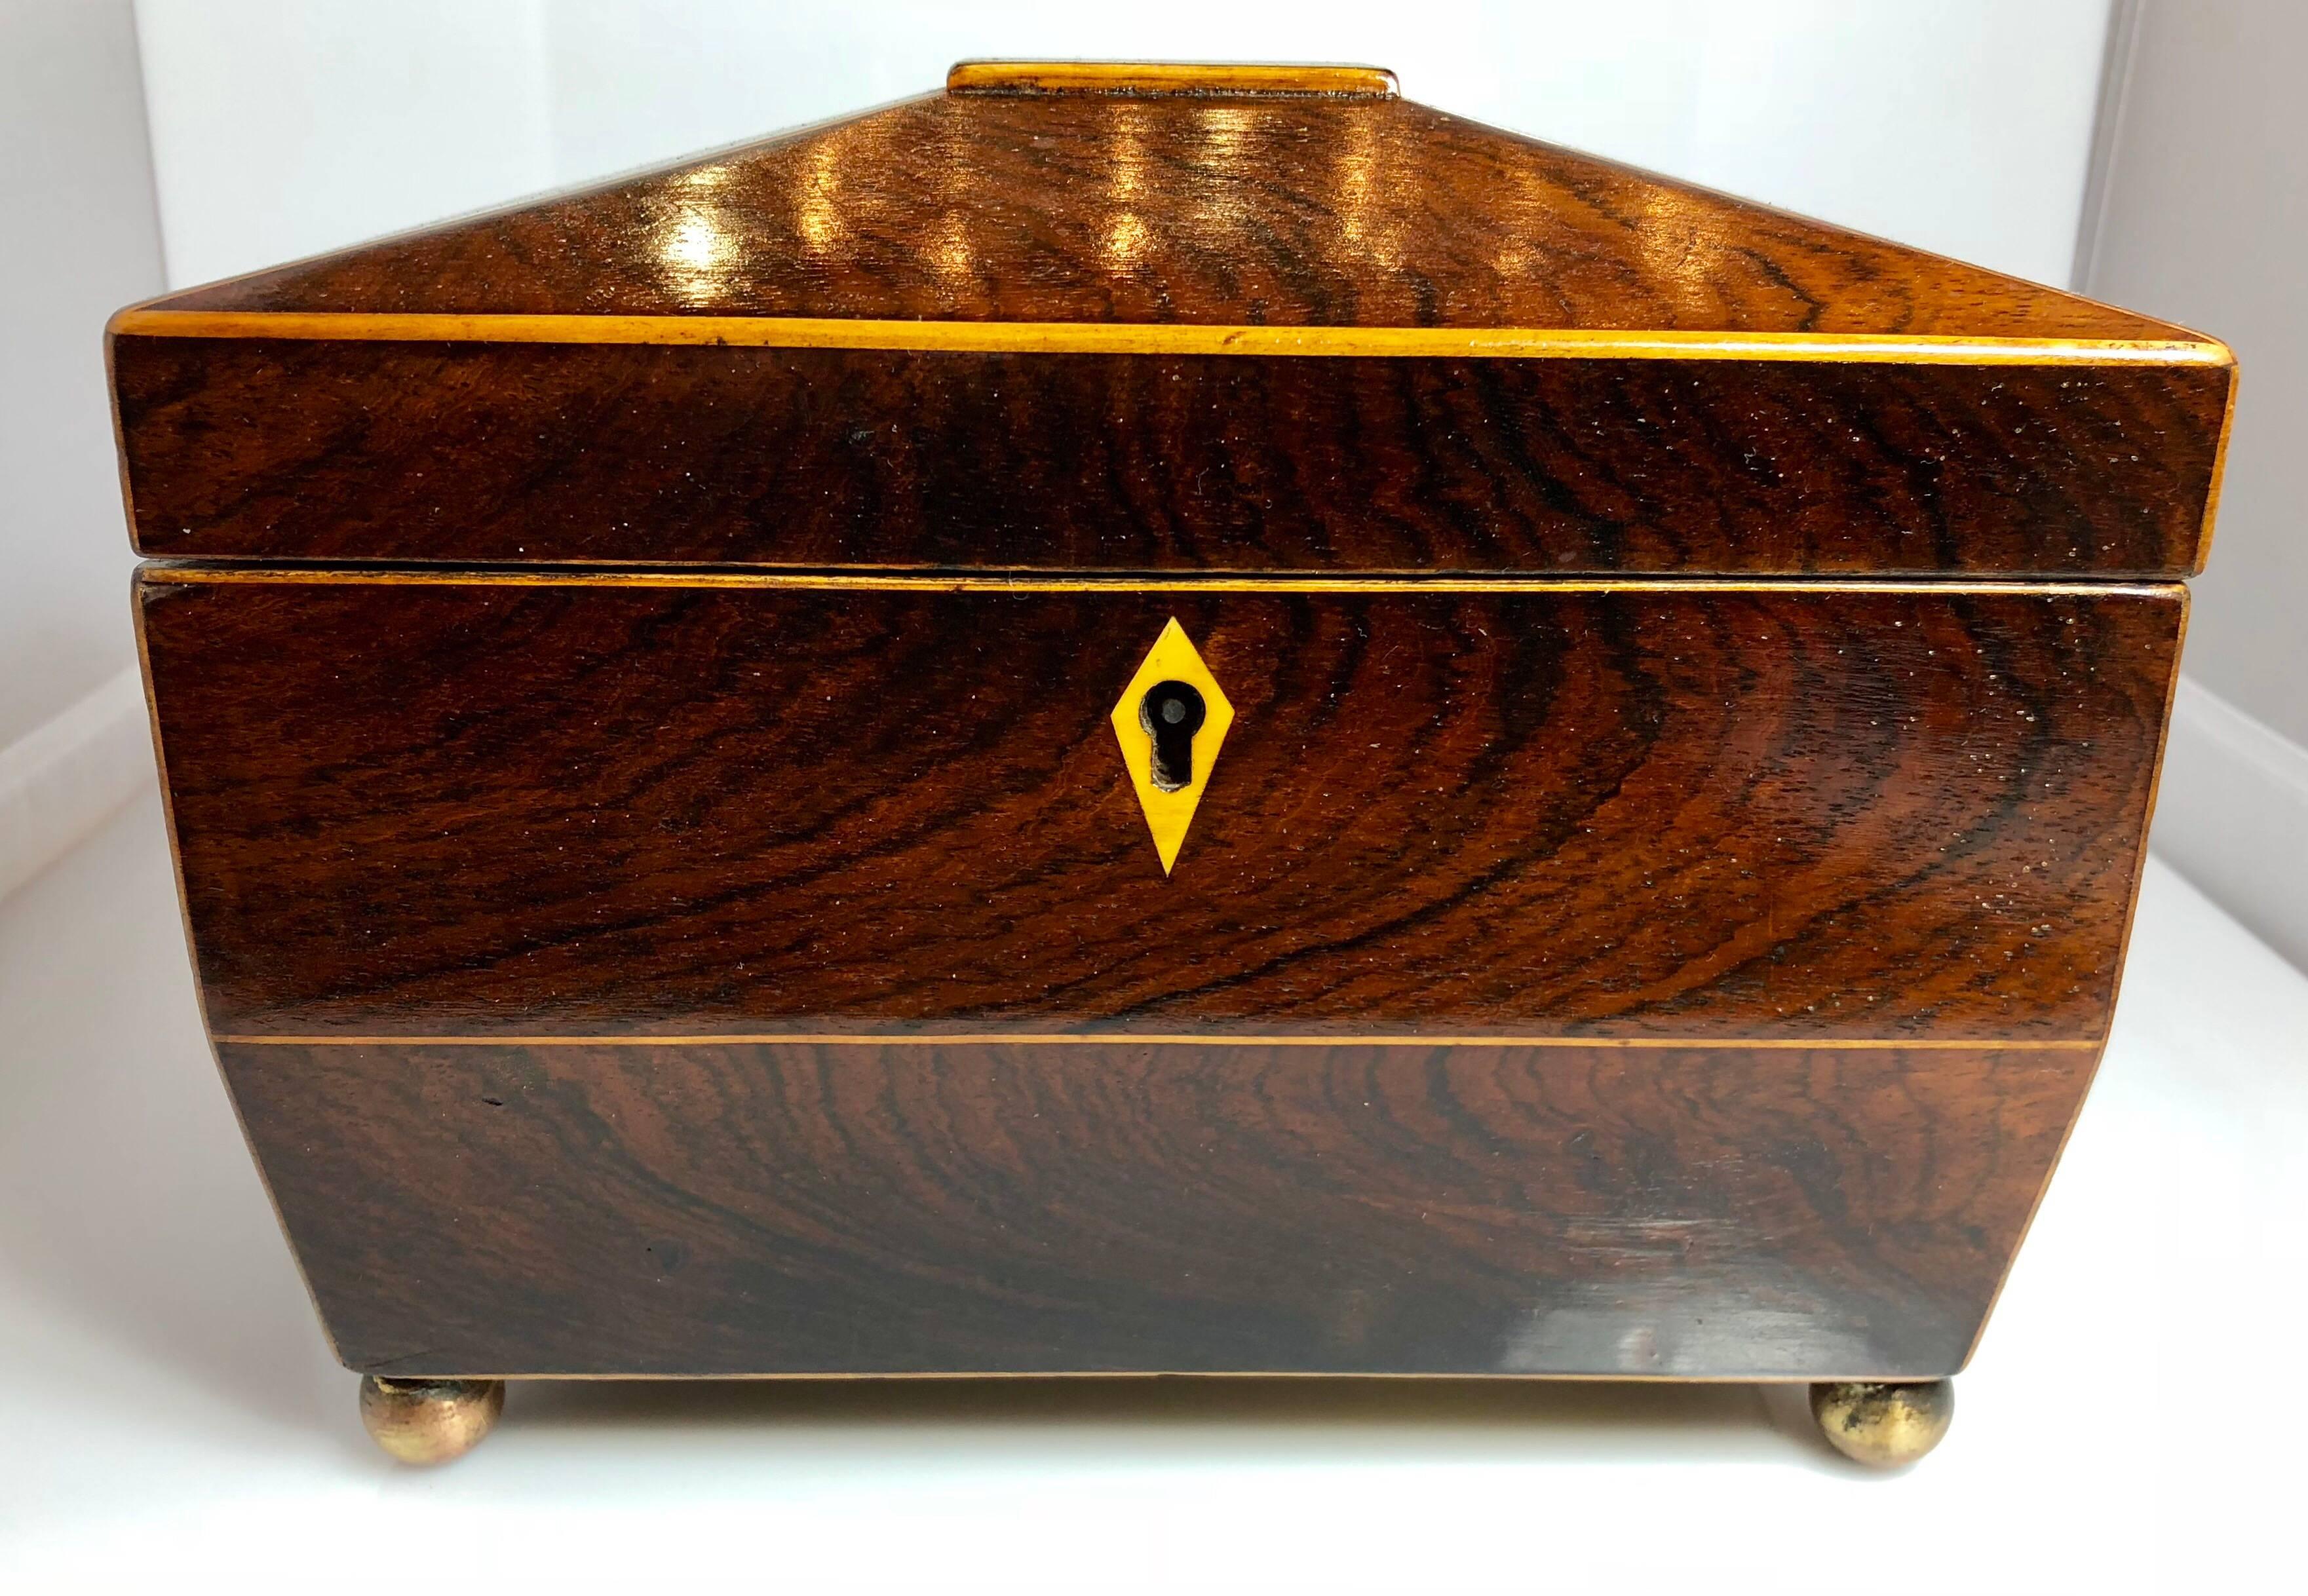 Antique English rosewood tea caddy with brass mounts, circa 1880.